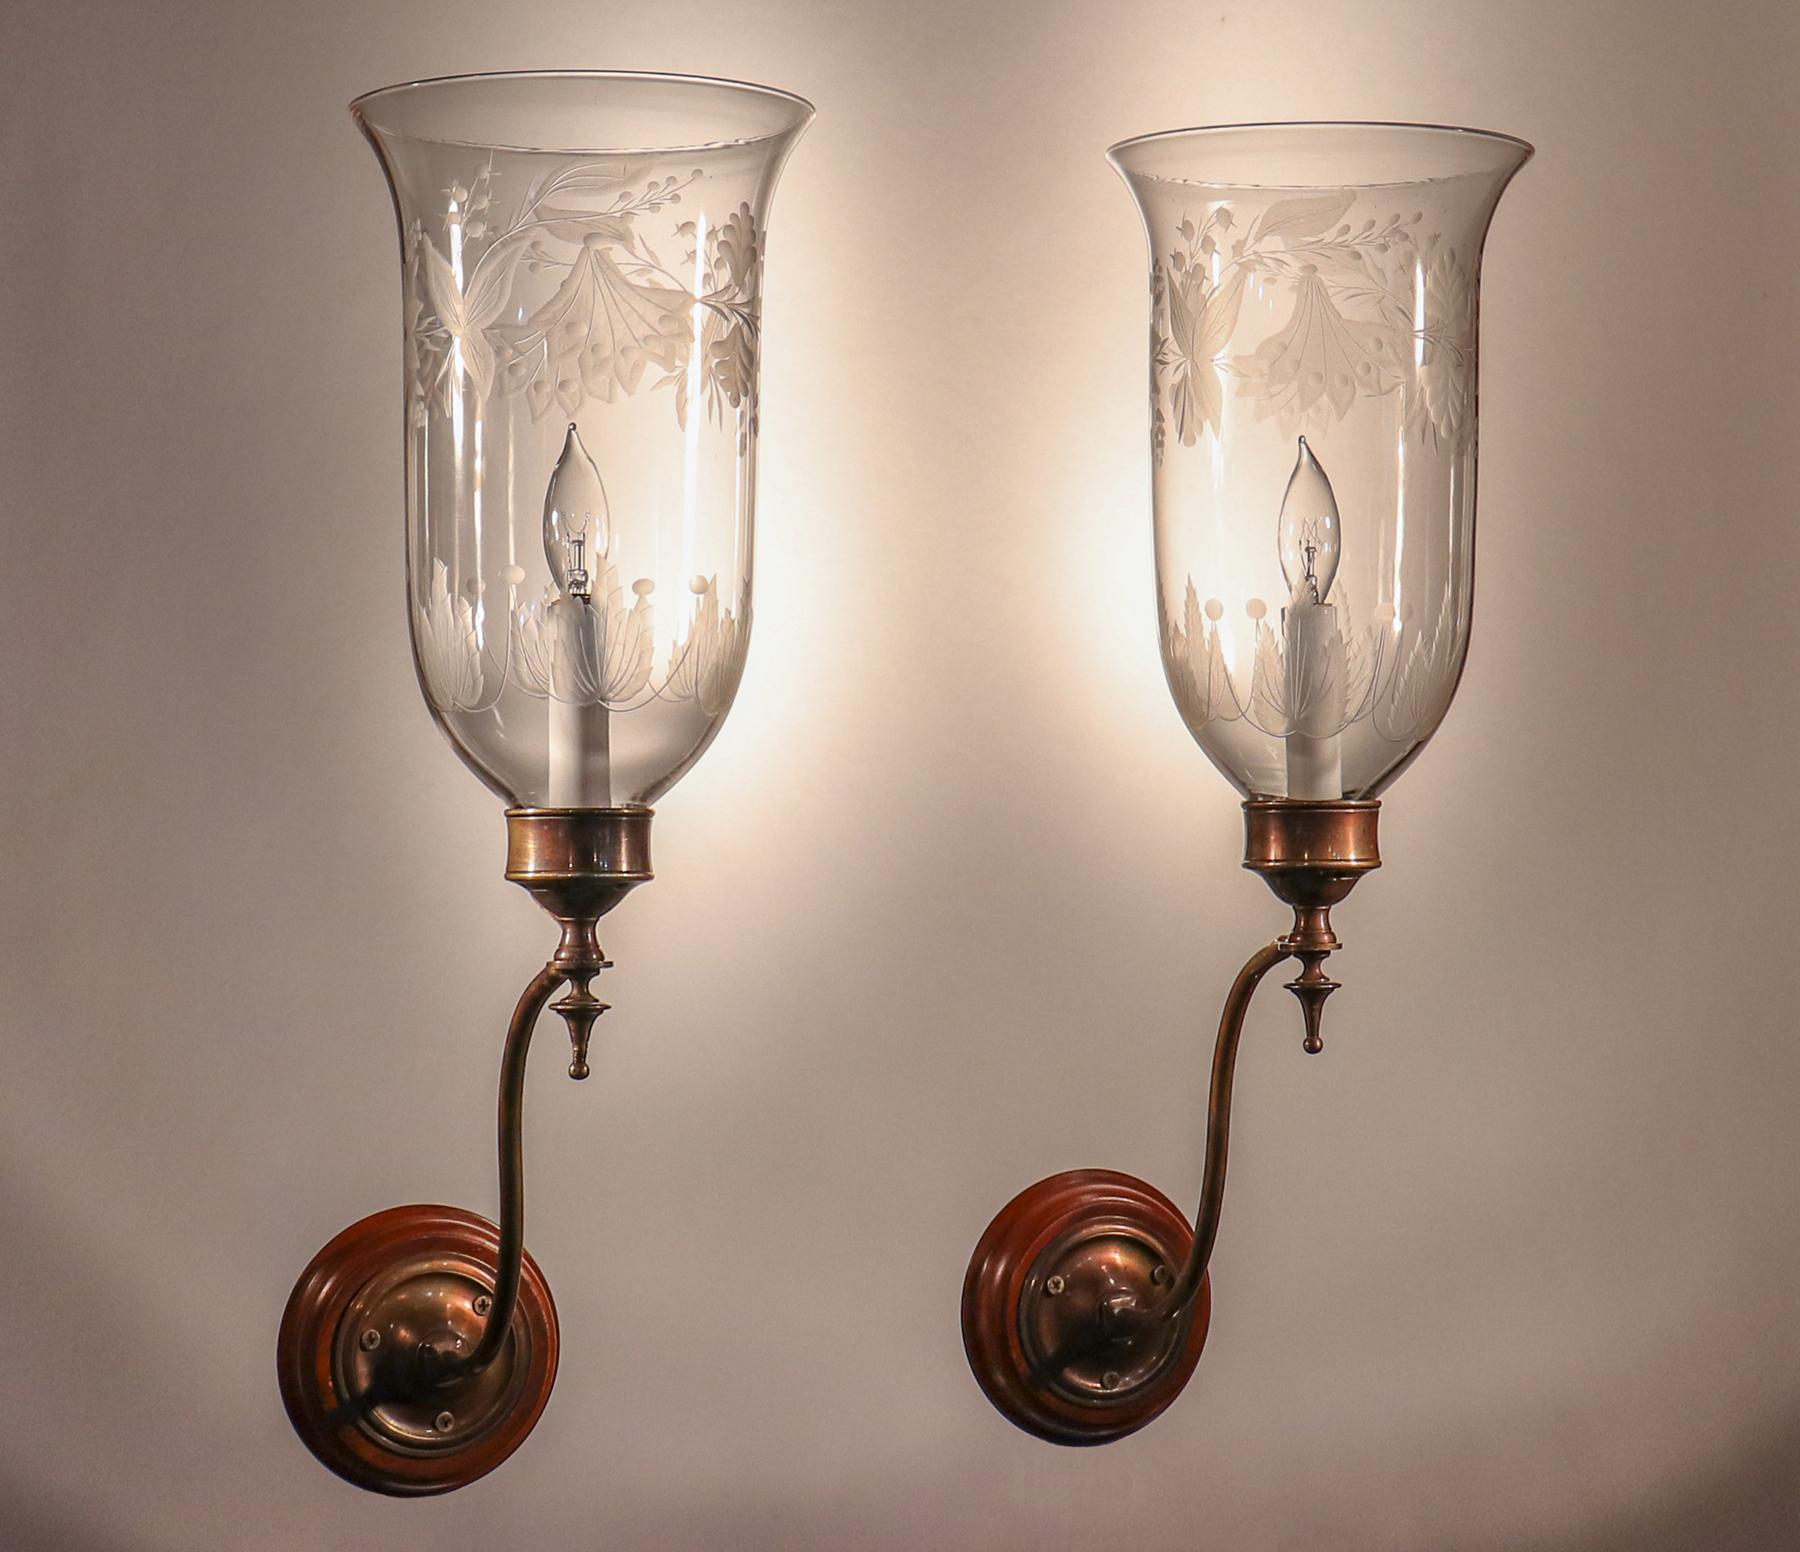 An exceptional pair of hurricane sconce shades from England (c. 1890) with full, flared form and superb quality hand blown glass. These hurricane shades feature an attractive flower and leaf frosted motif. The wall sconces have been newly